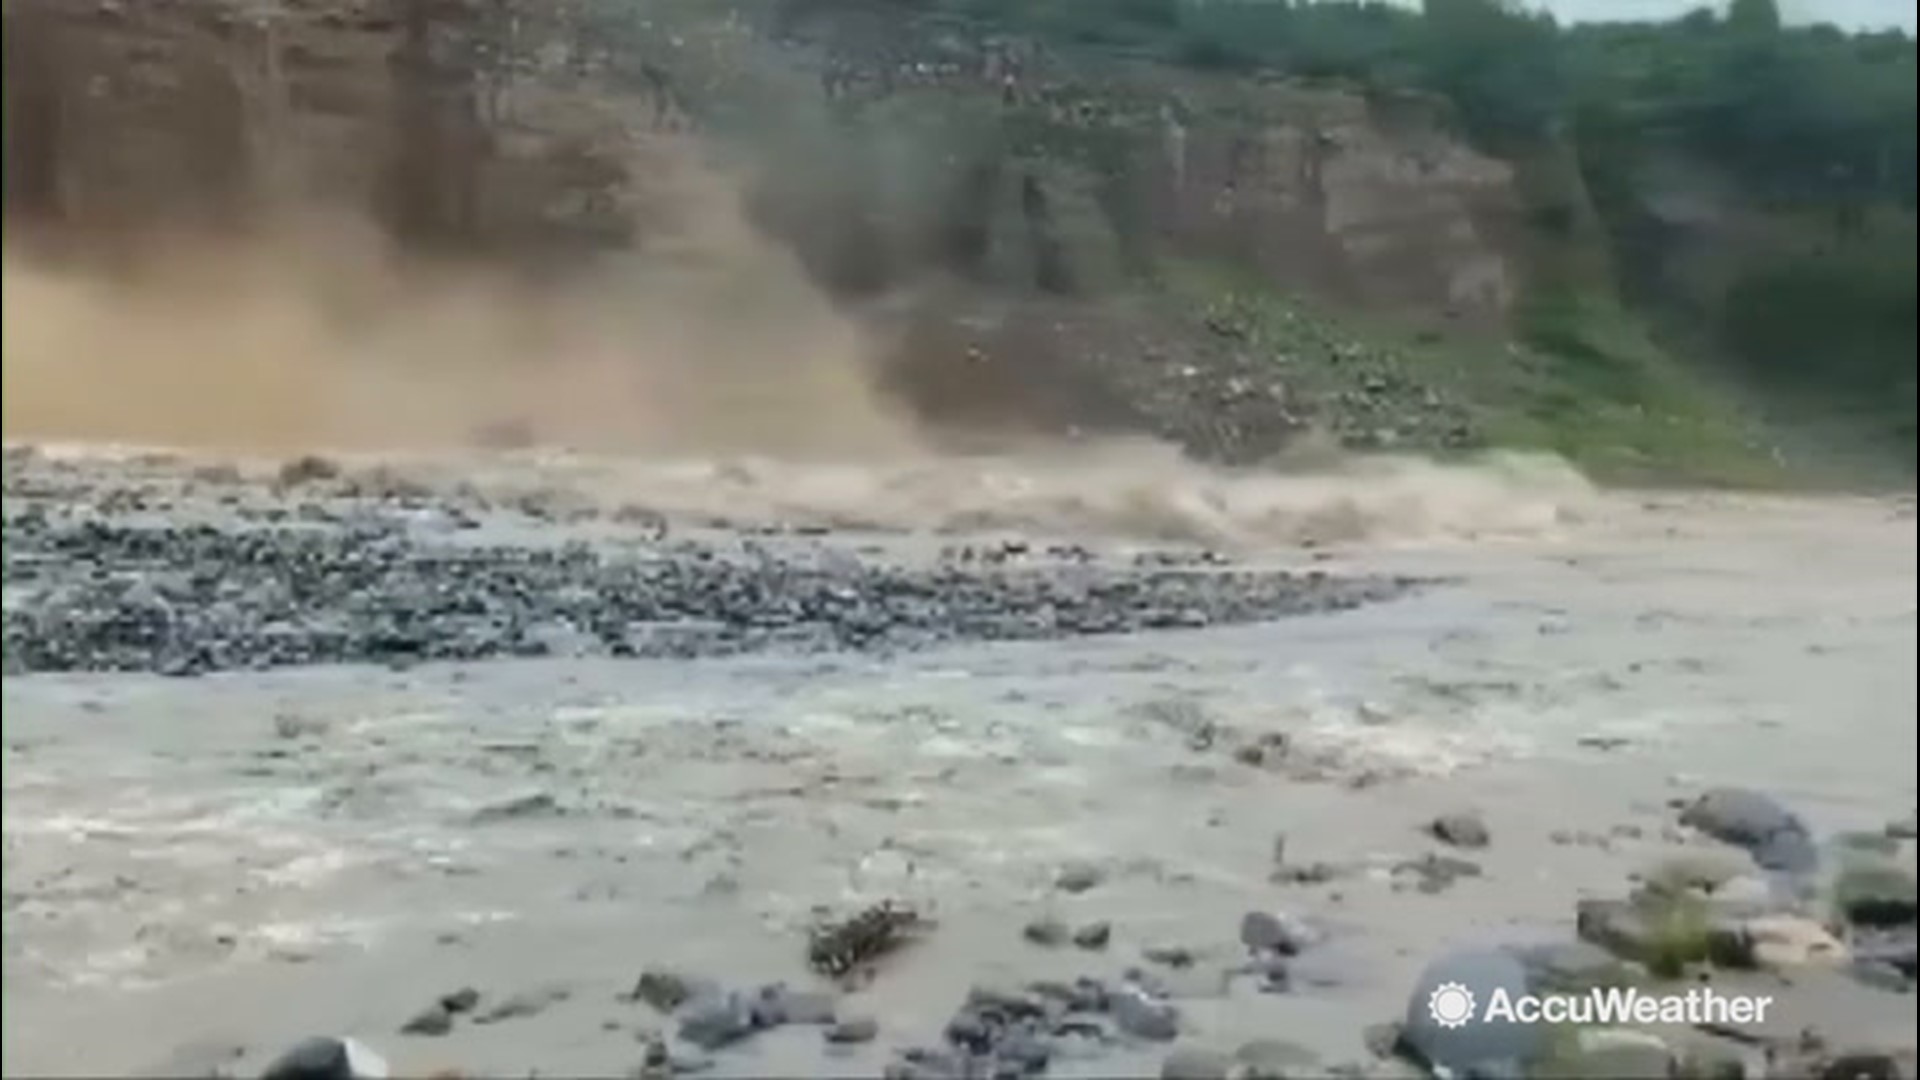 Heavy rain created a mess across the Himalayan region of India on Aug. 18. Landslides blocked and damaged roads, while flash flooding threatened homes along streams.